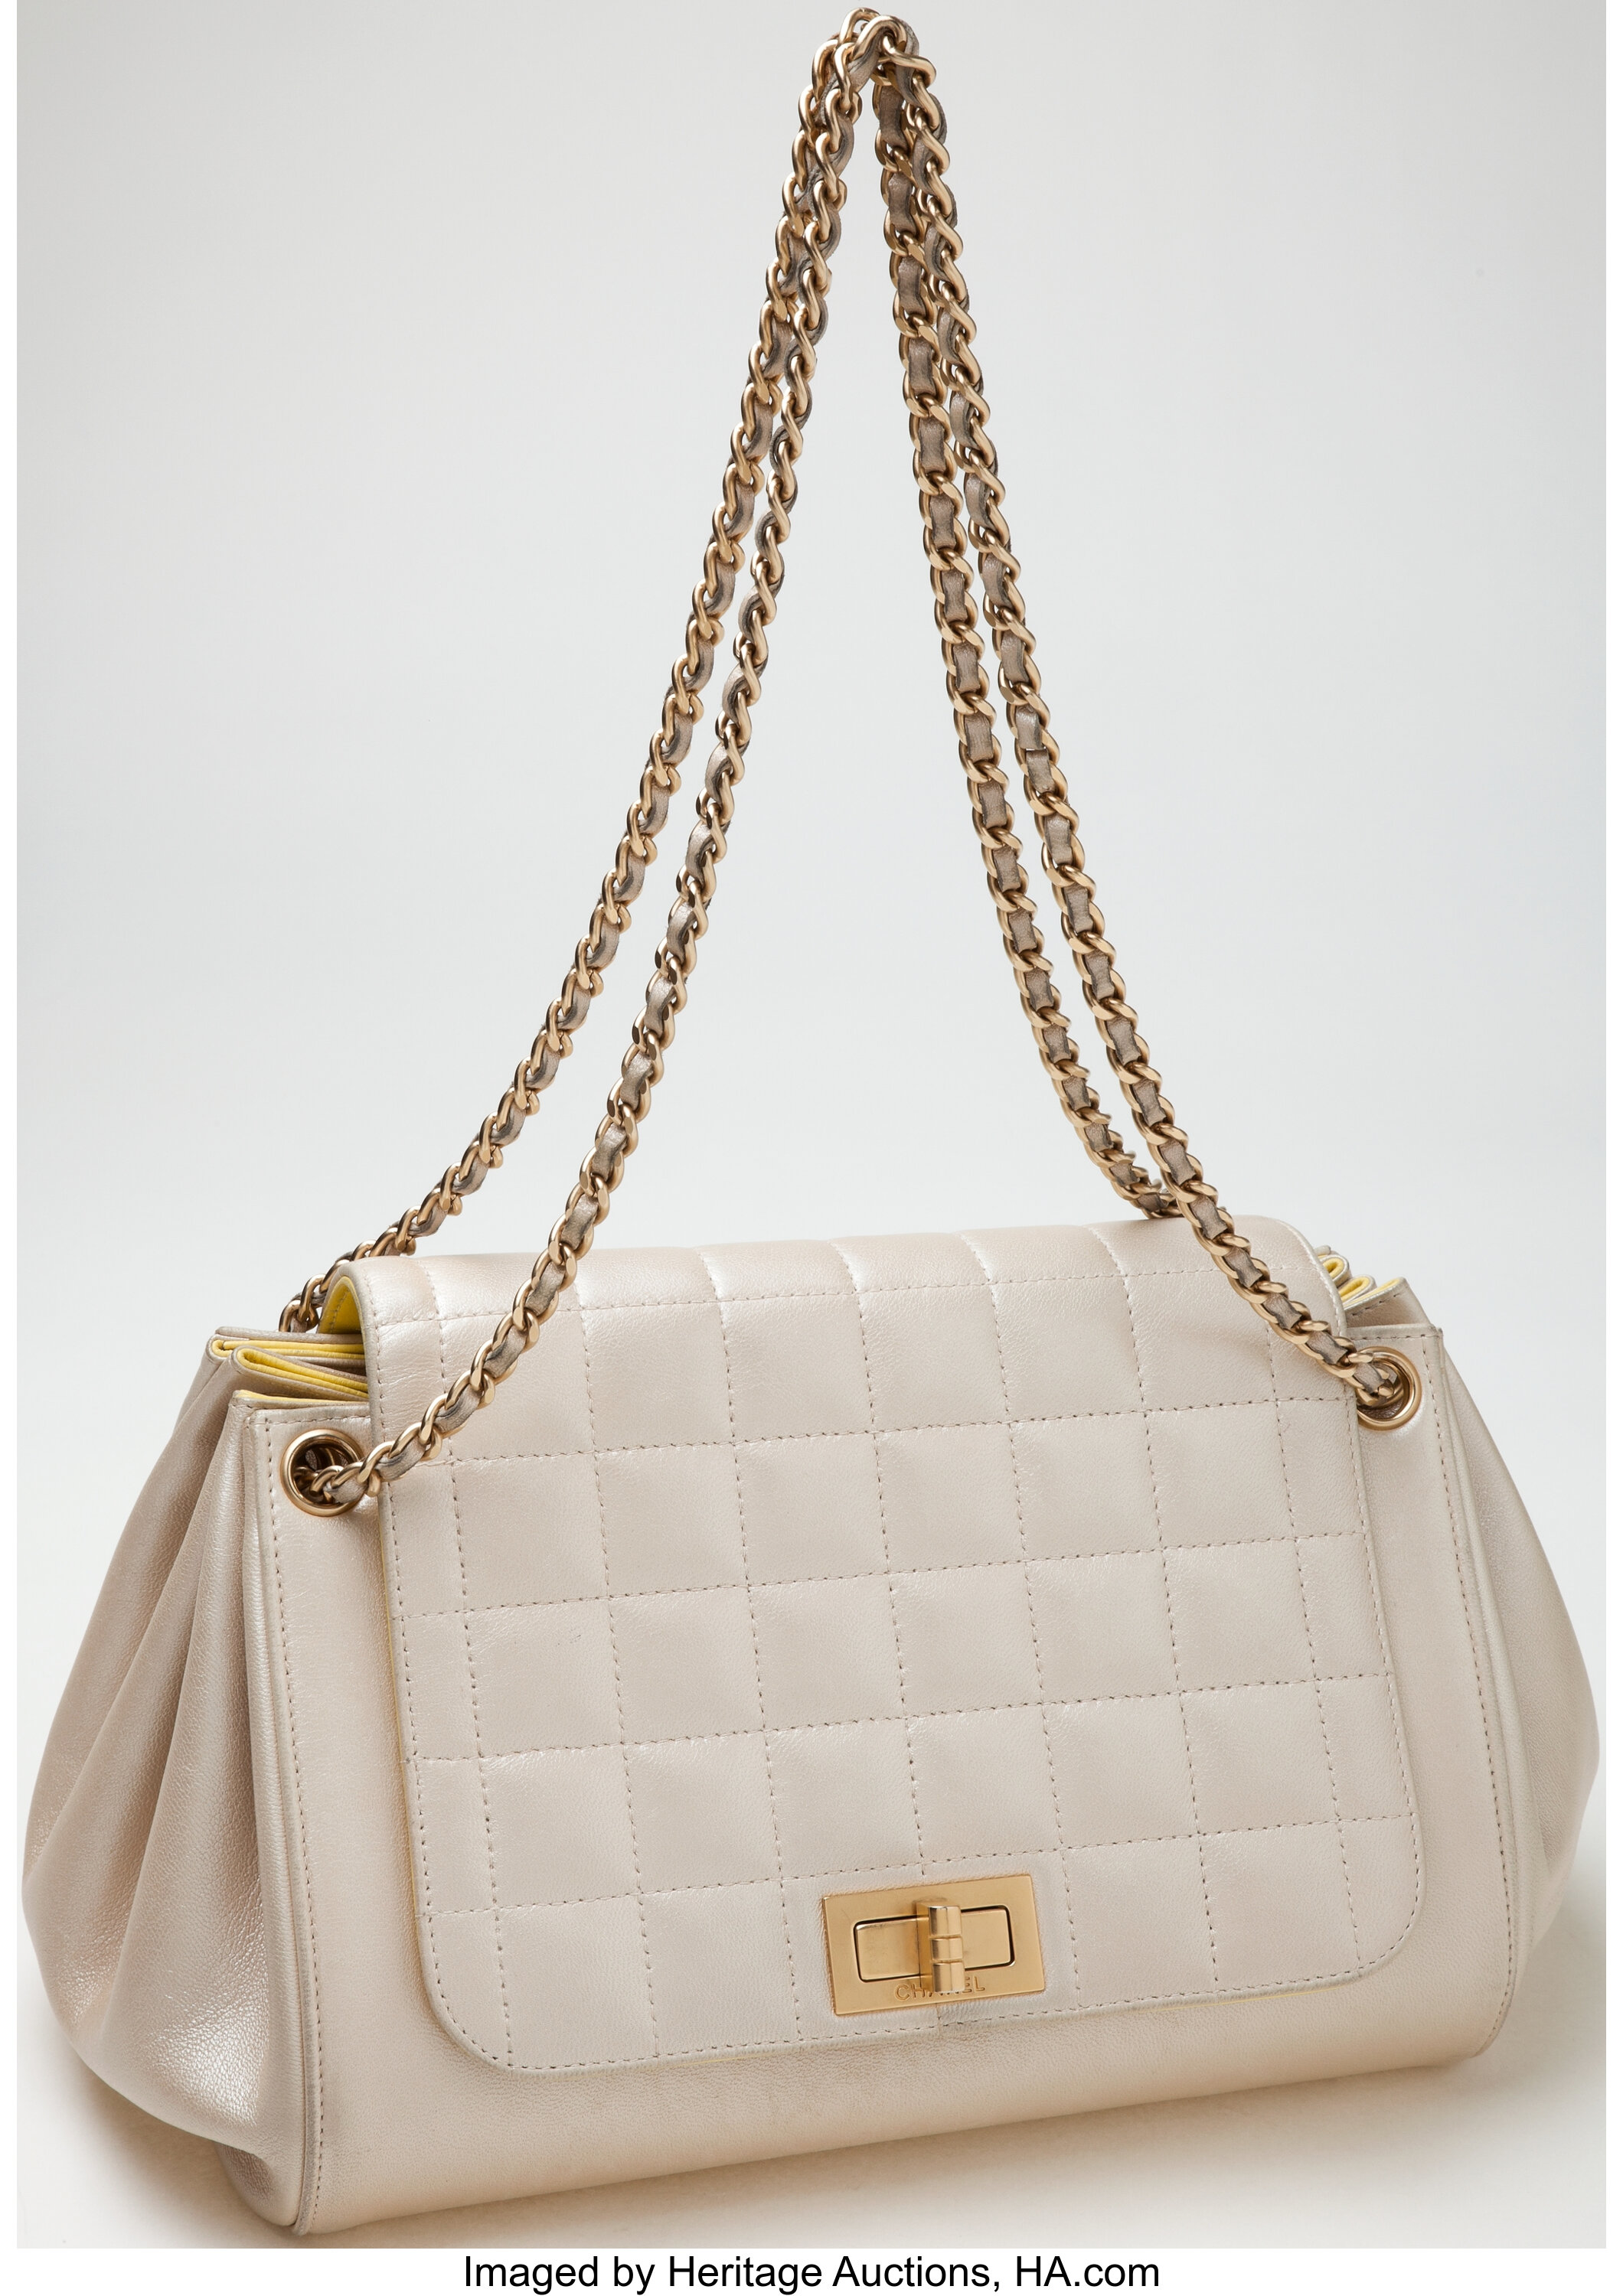 Sold at Auction: Vintage Chanel Quilted White Leather Handbag